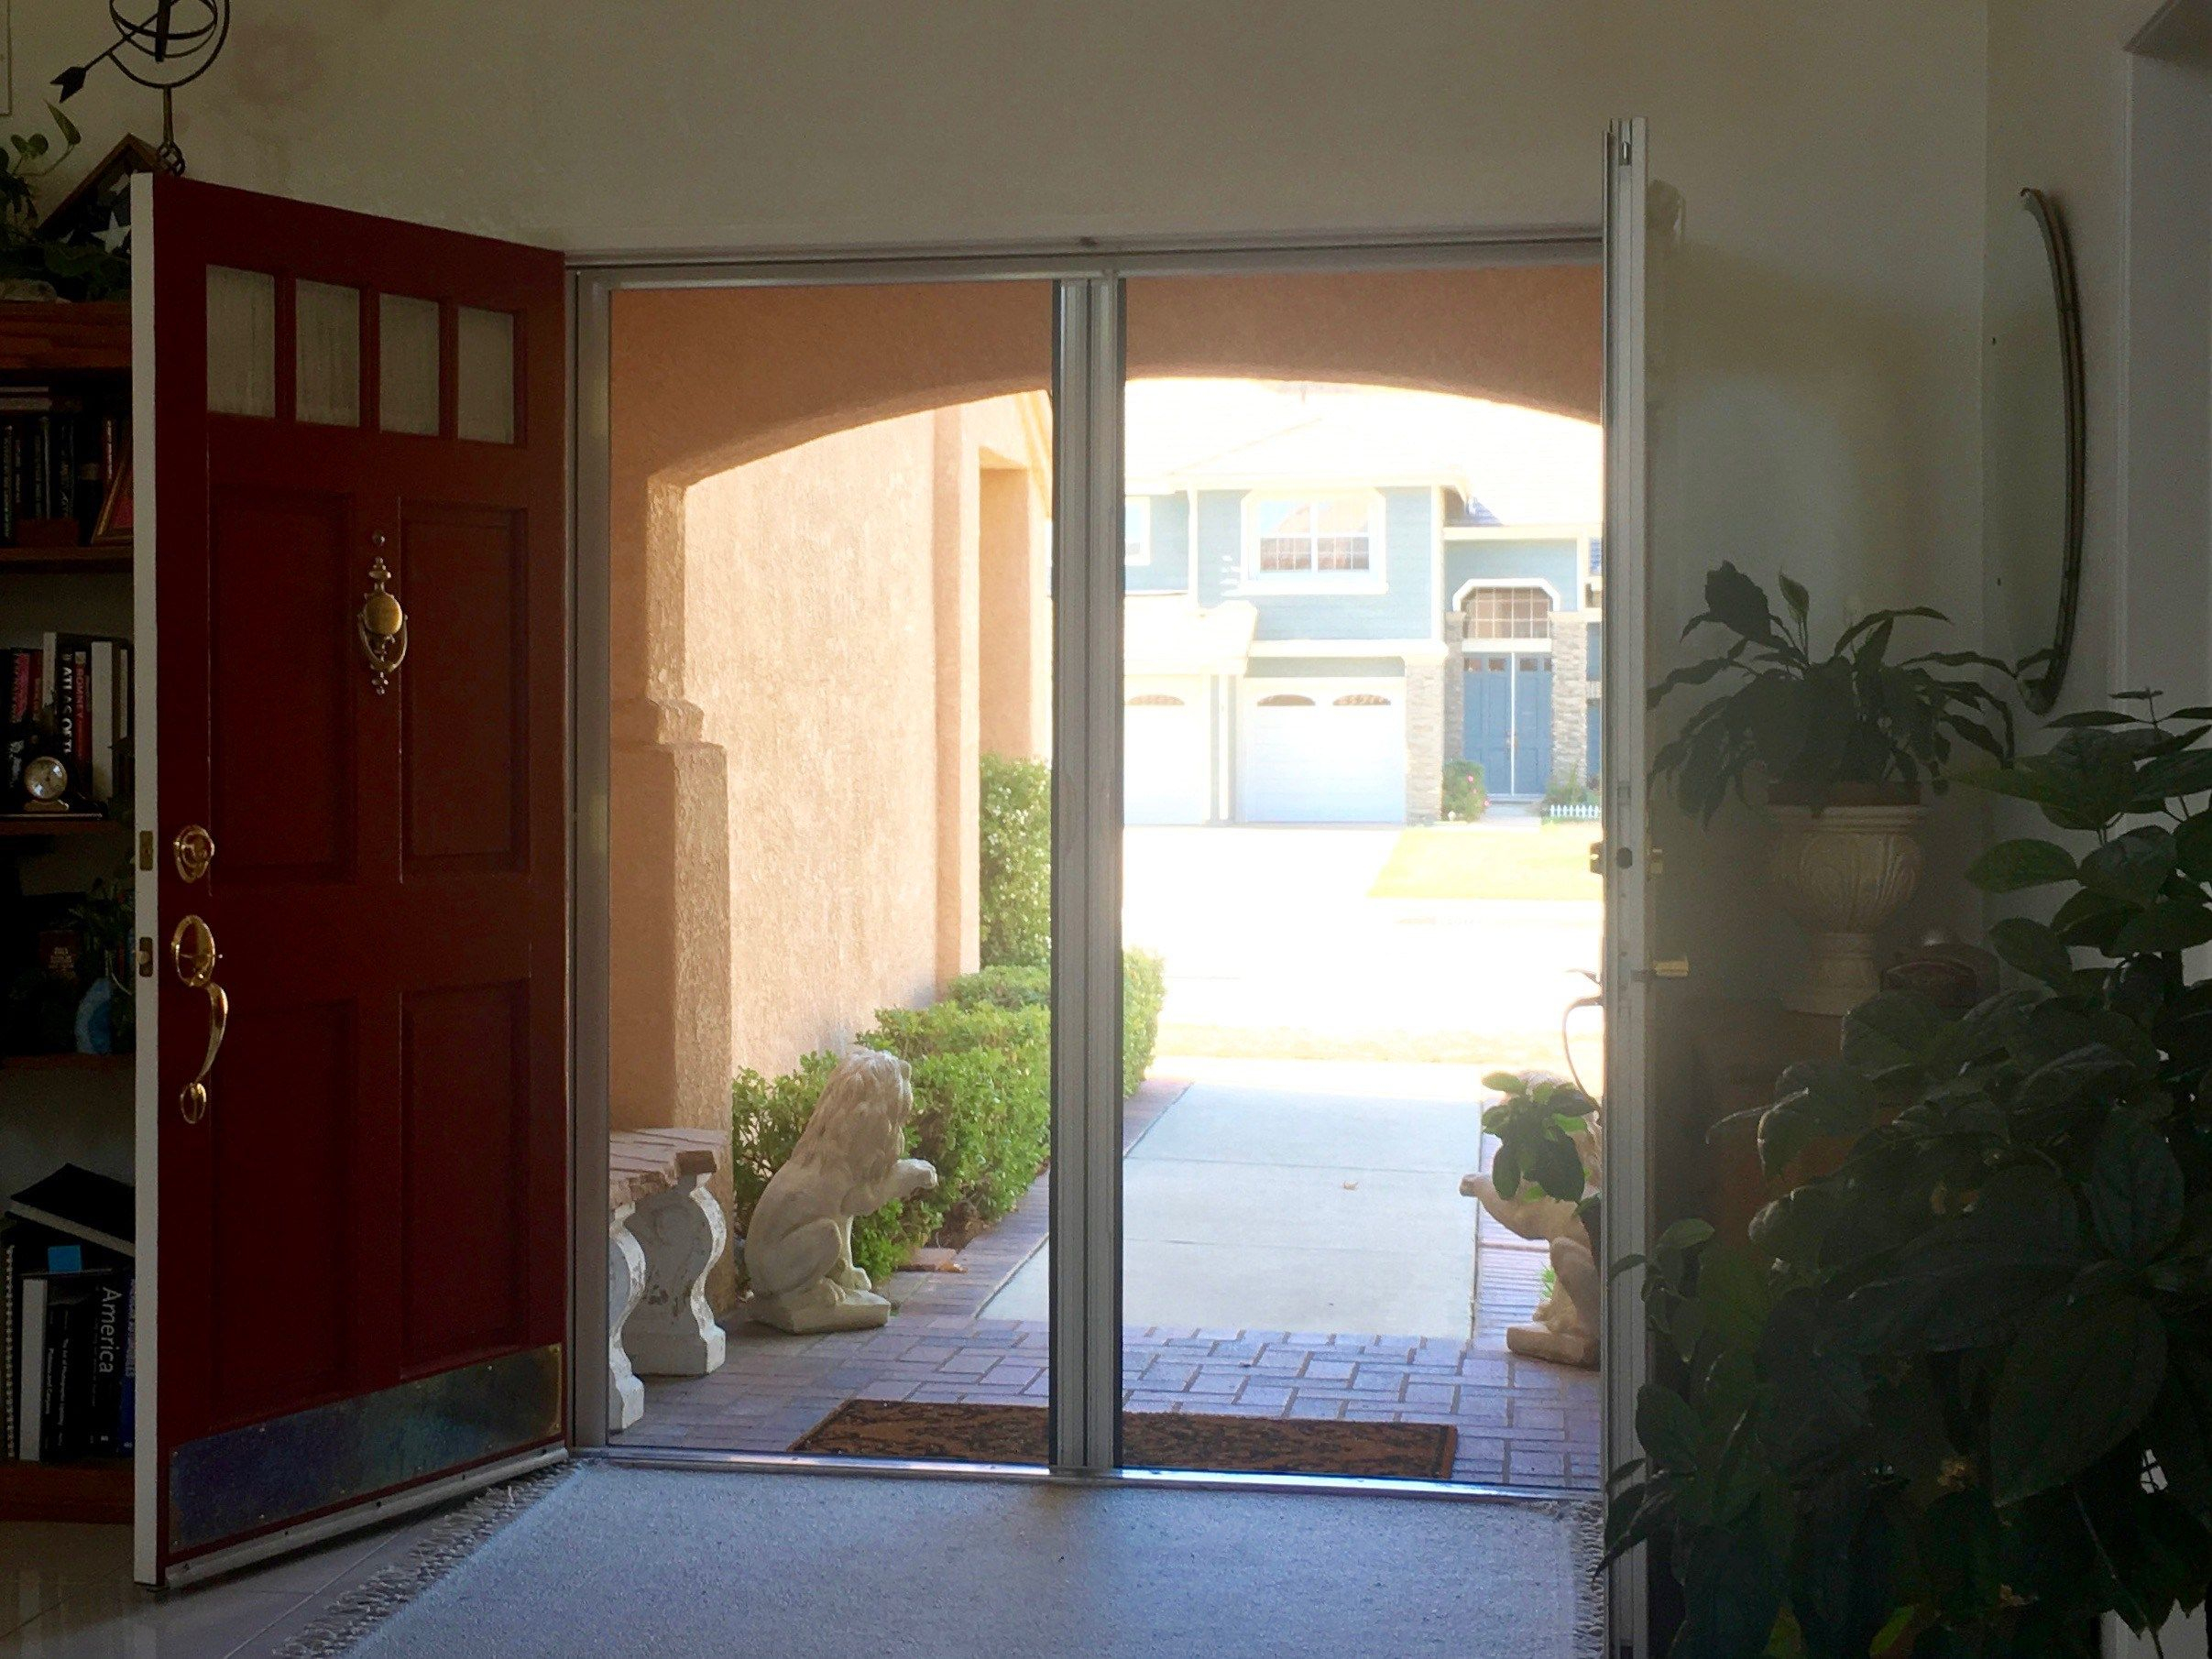 Let The Fresh Air In With Genius Retractable Screen Doors within sizing 2414 X 1811